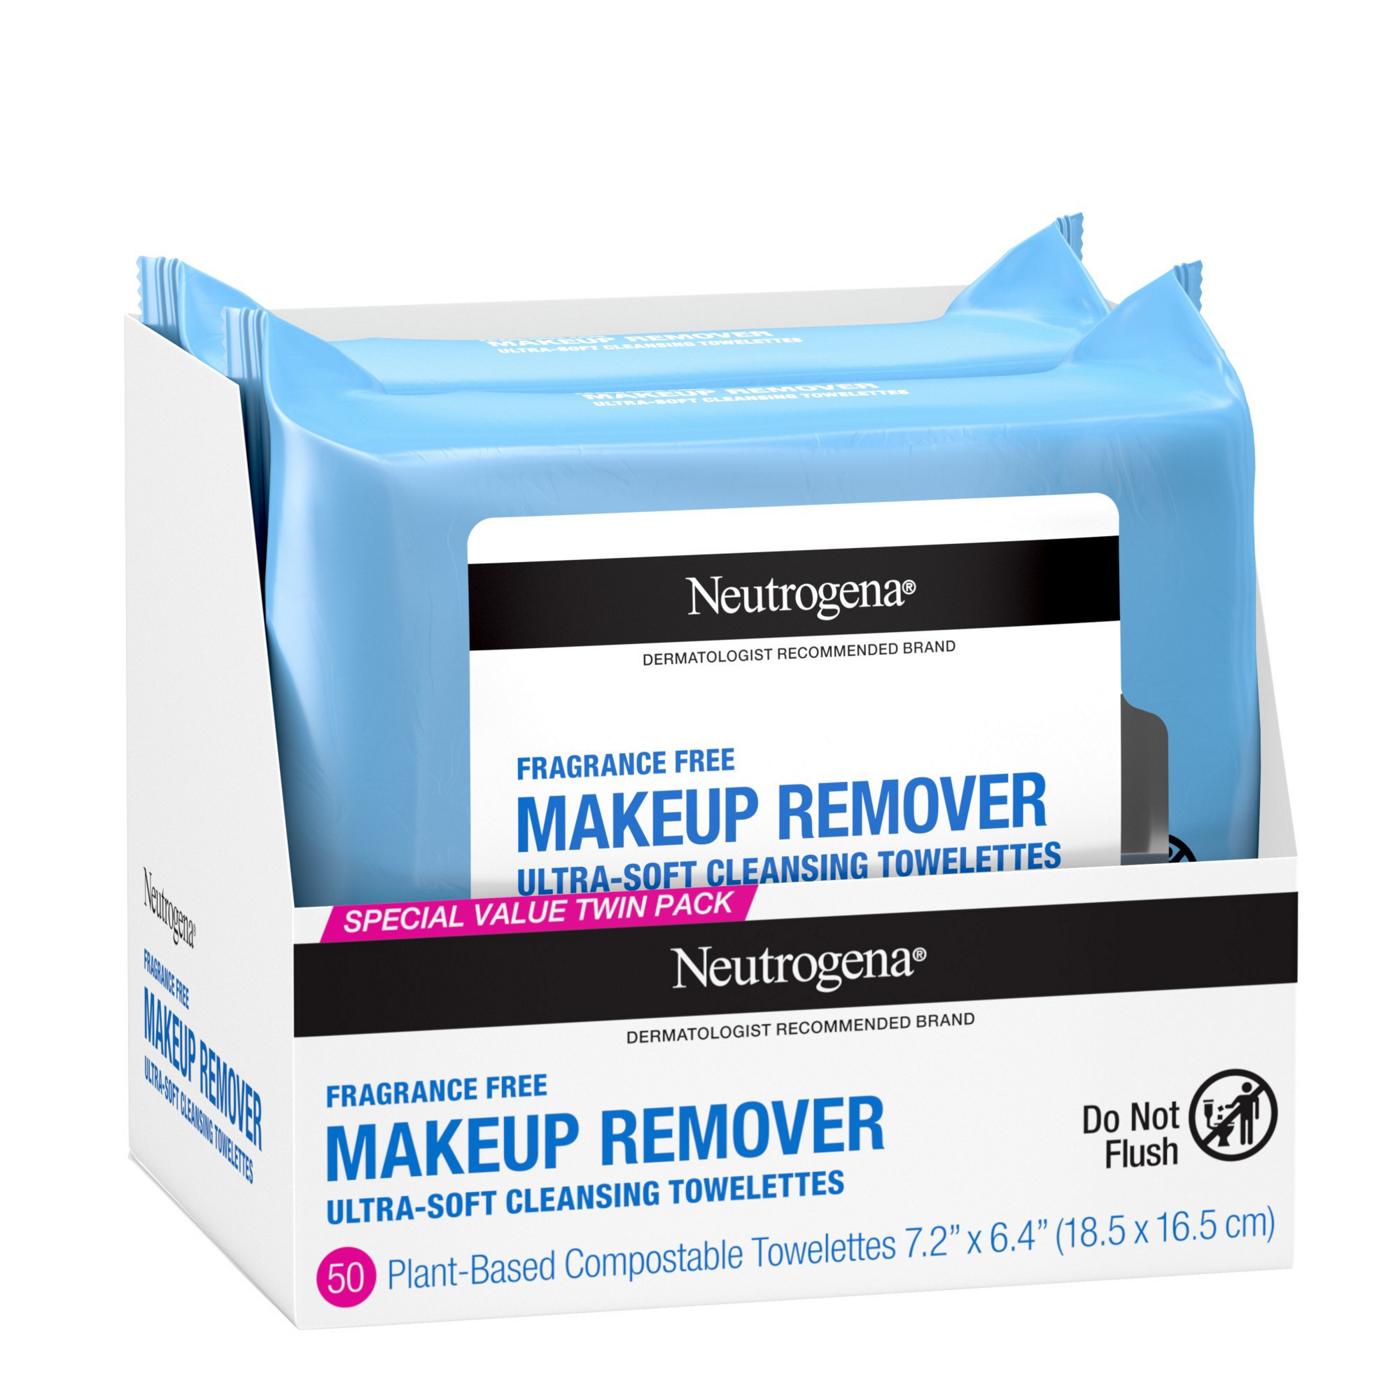 Neutrogena Makeup Remover Fragrance Free Cleansing Towelettes - Twin Pack; image 8 of 8